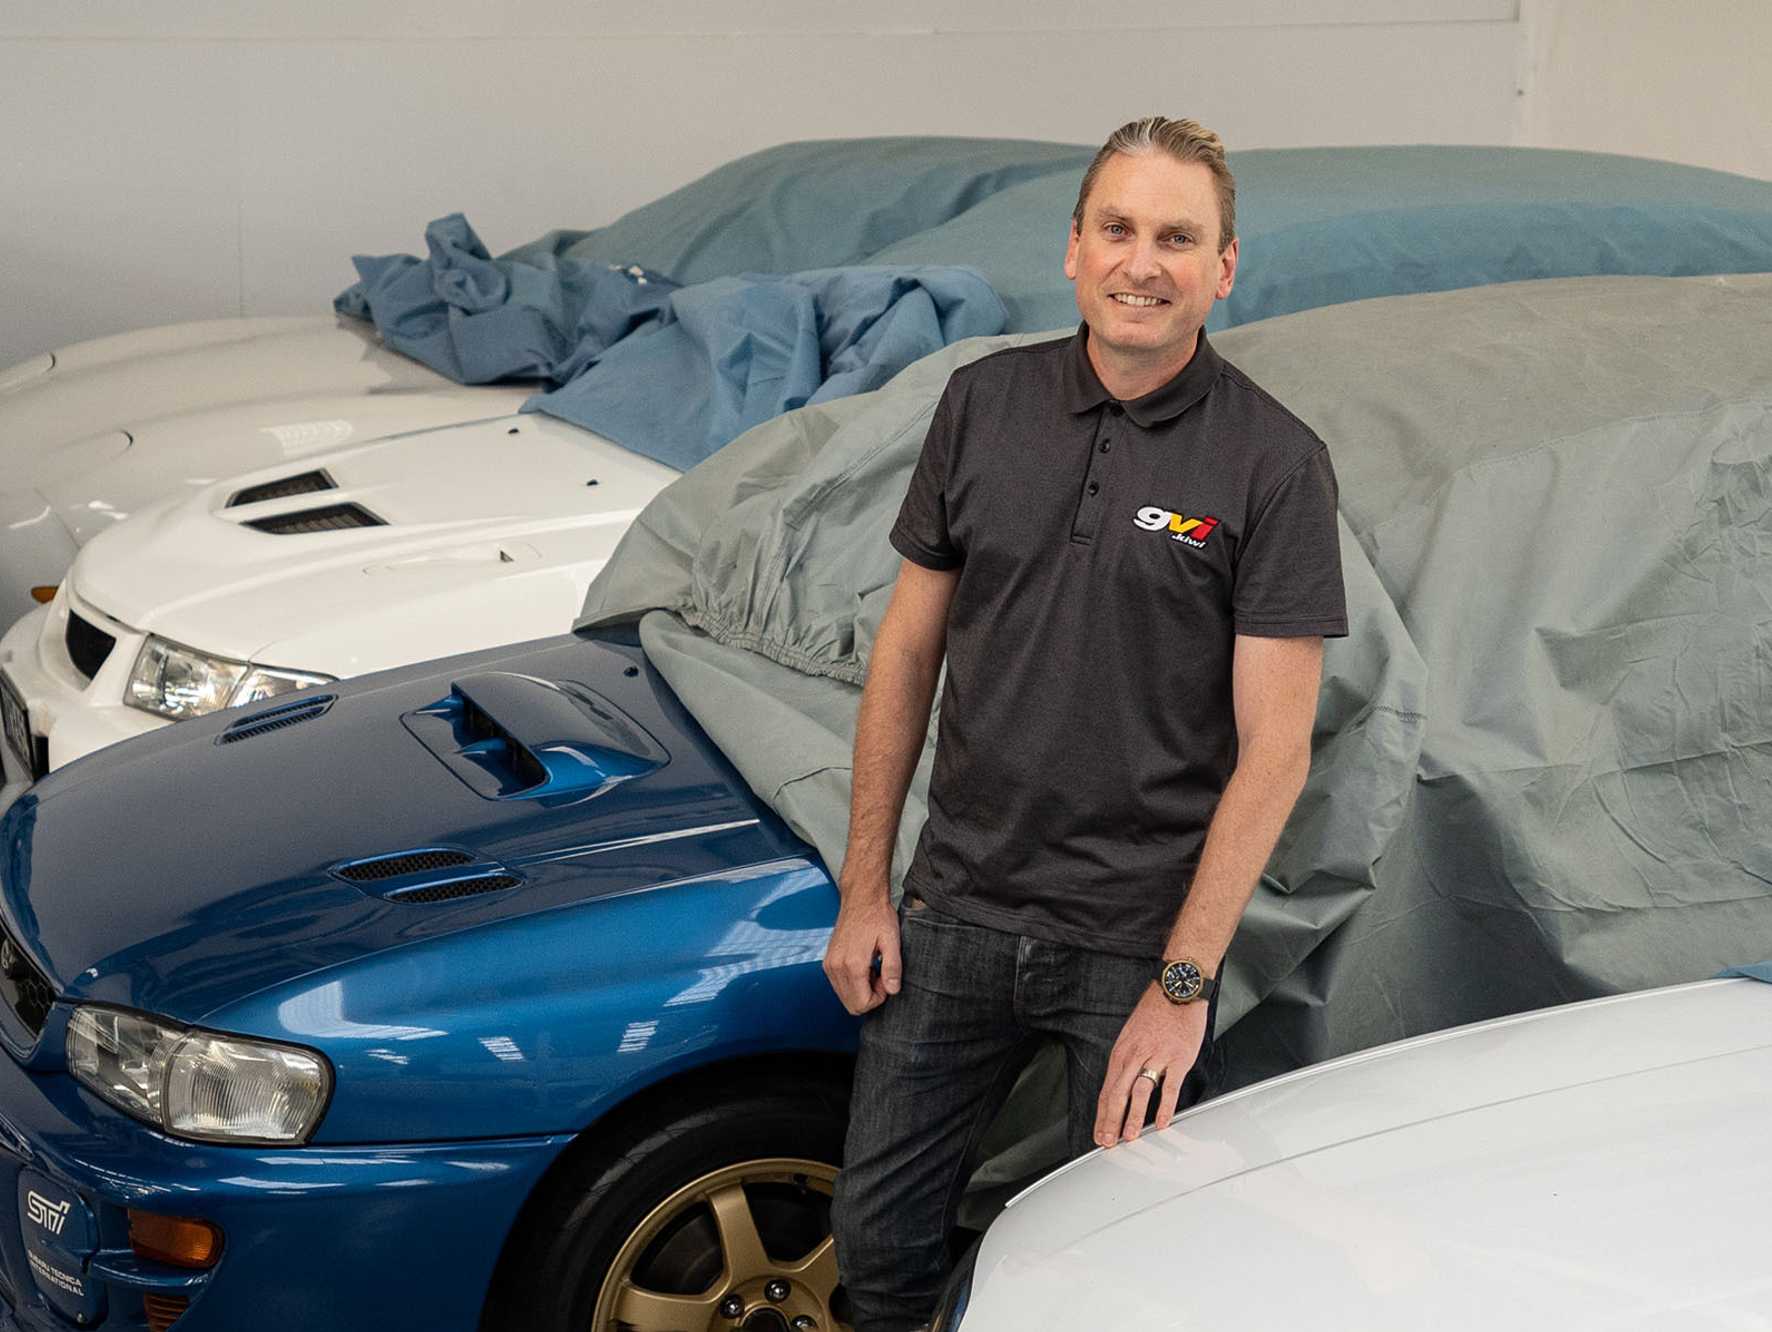 ‘My dividend is the joy of driving my classic cars’